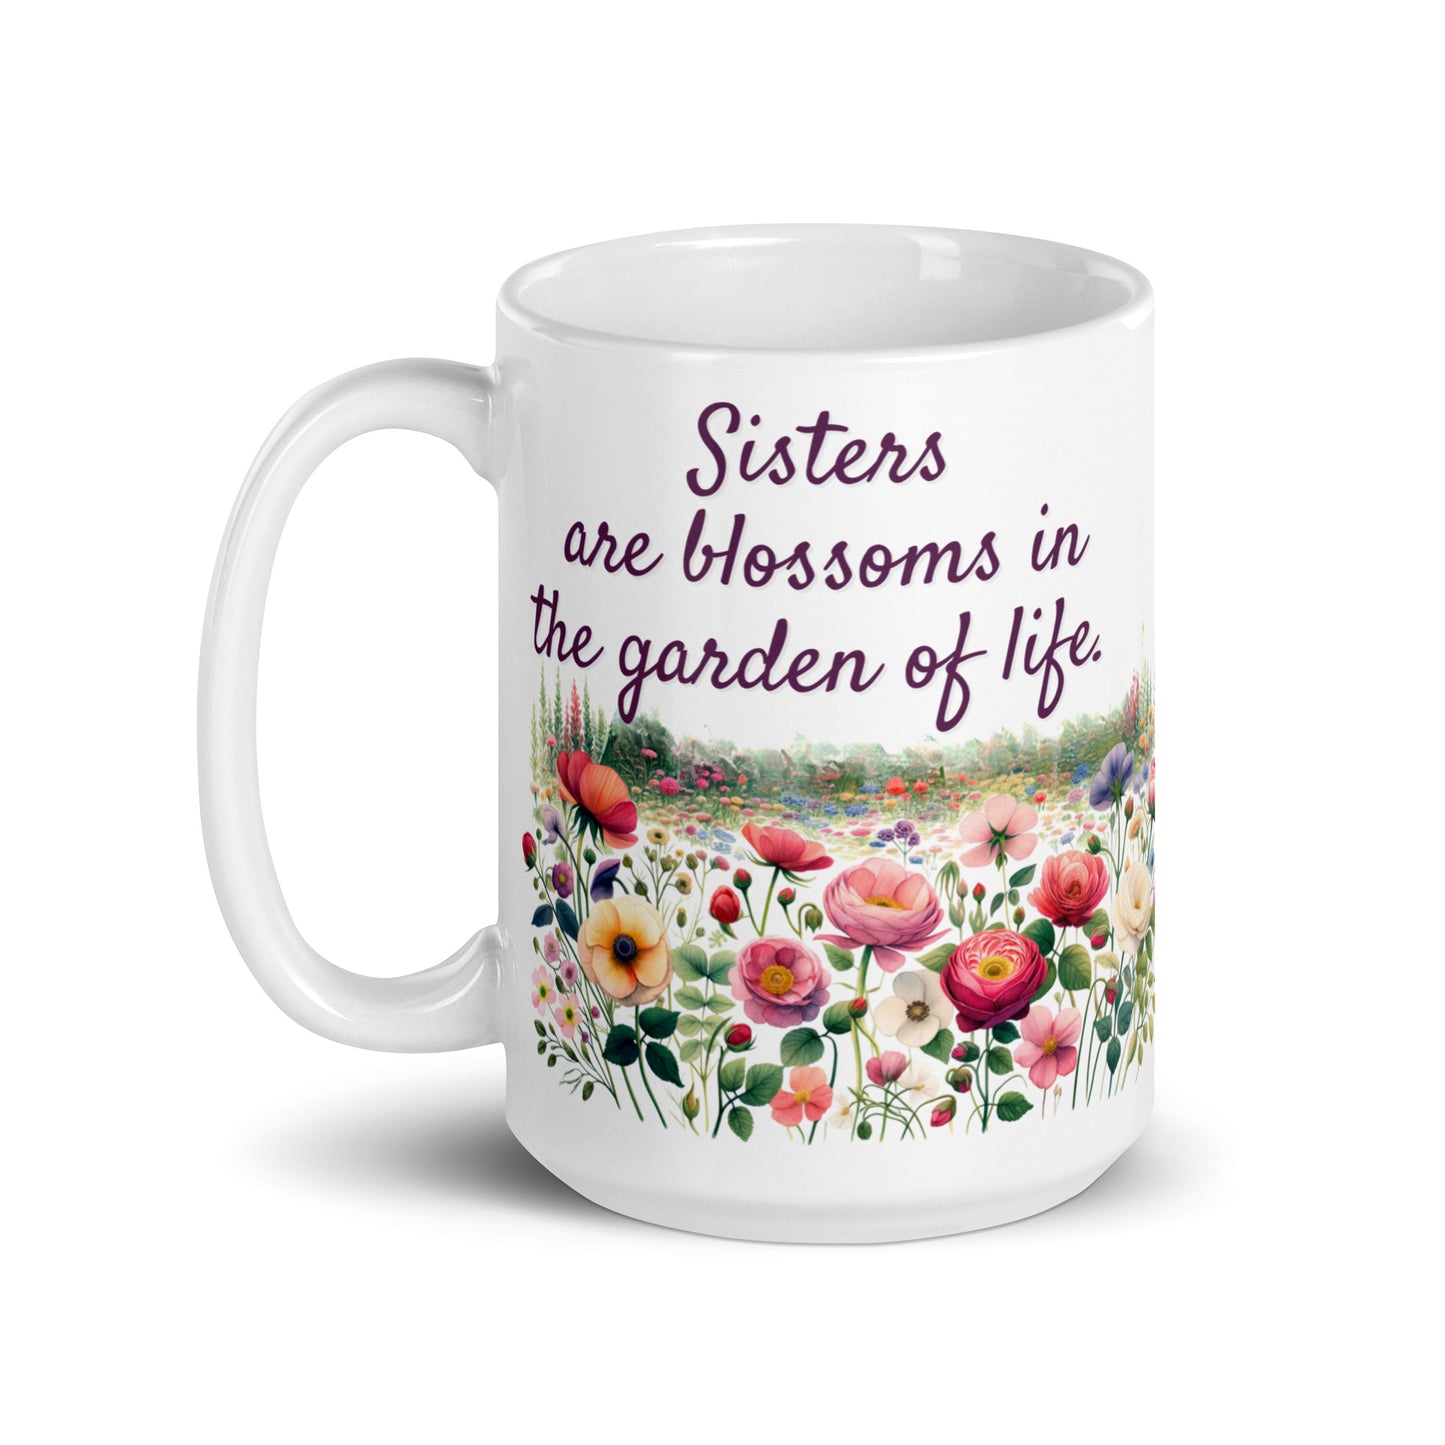 White Glossy Mug - Sisters are Blossoms in Garden of Life